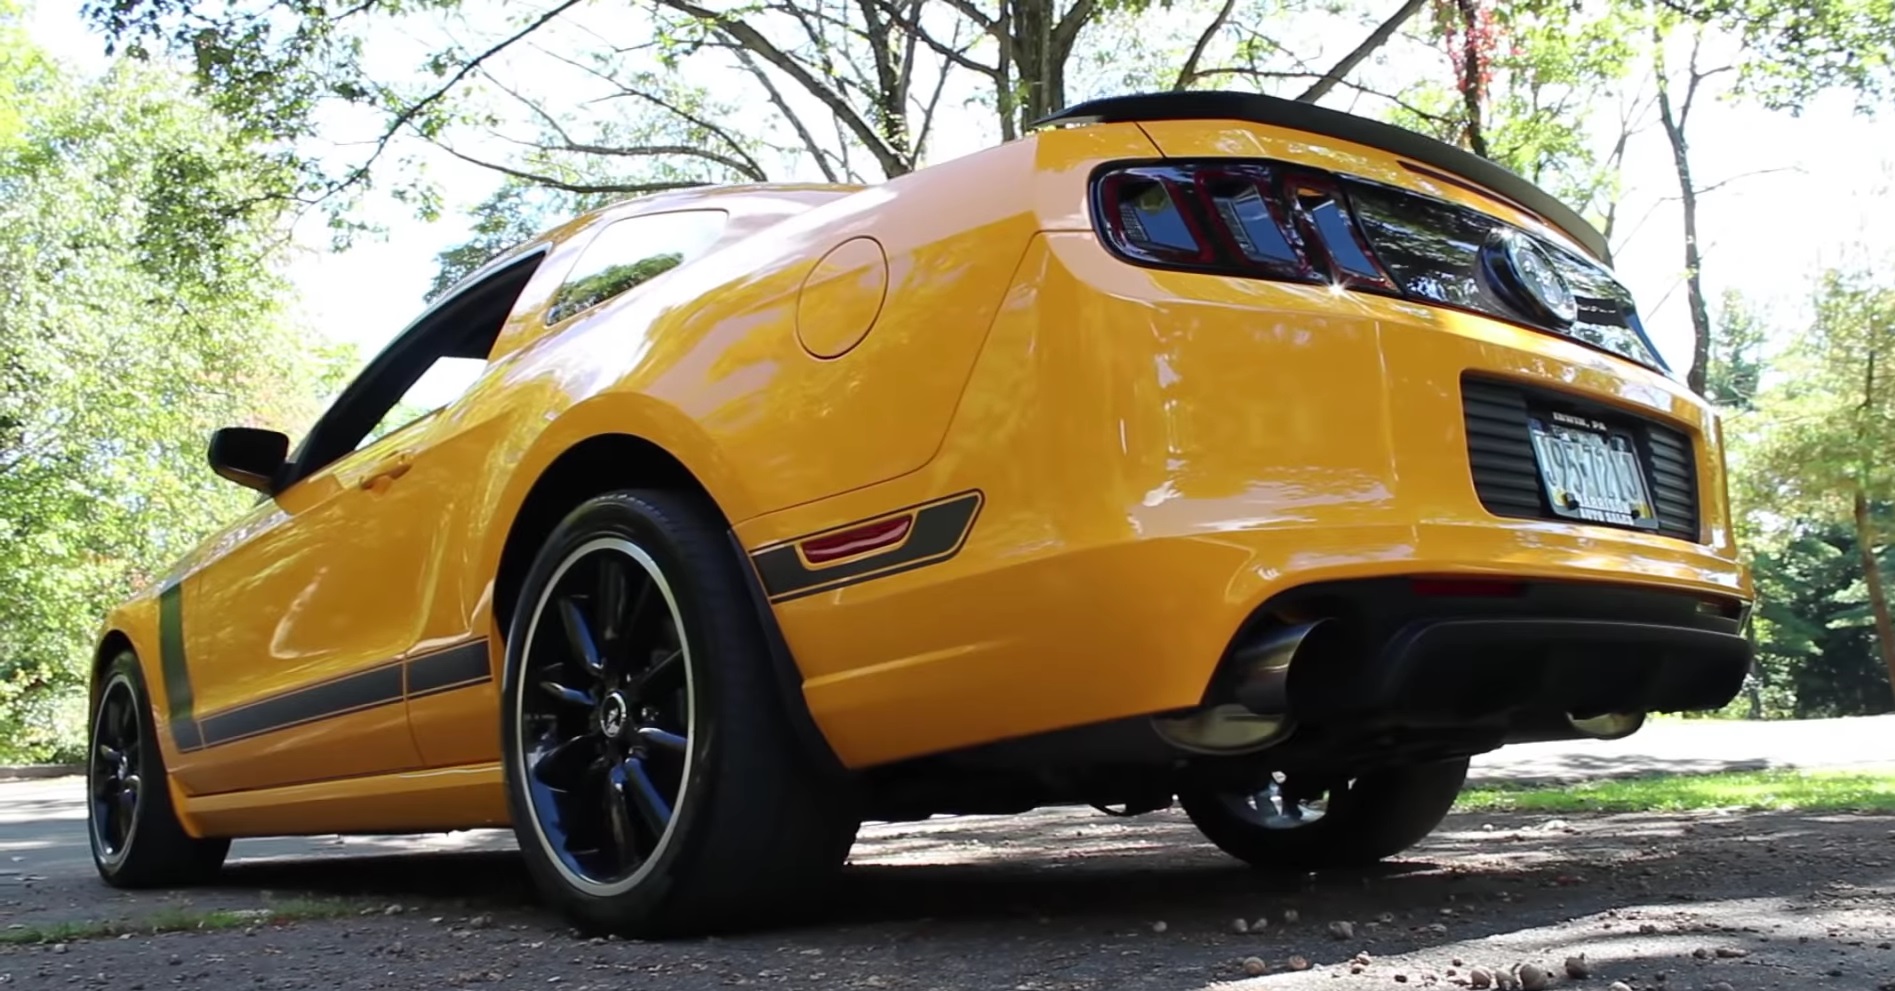 Video: 2013 Ford Mustang Boss 302 Review